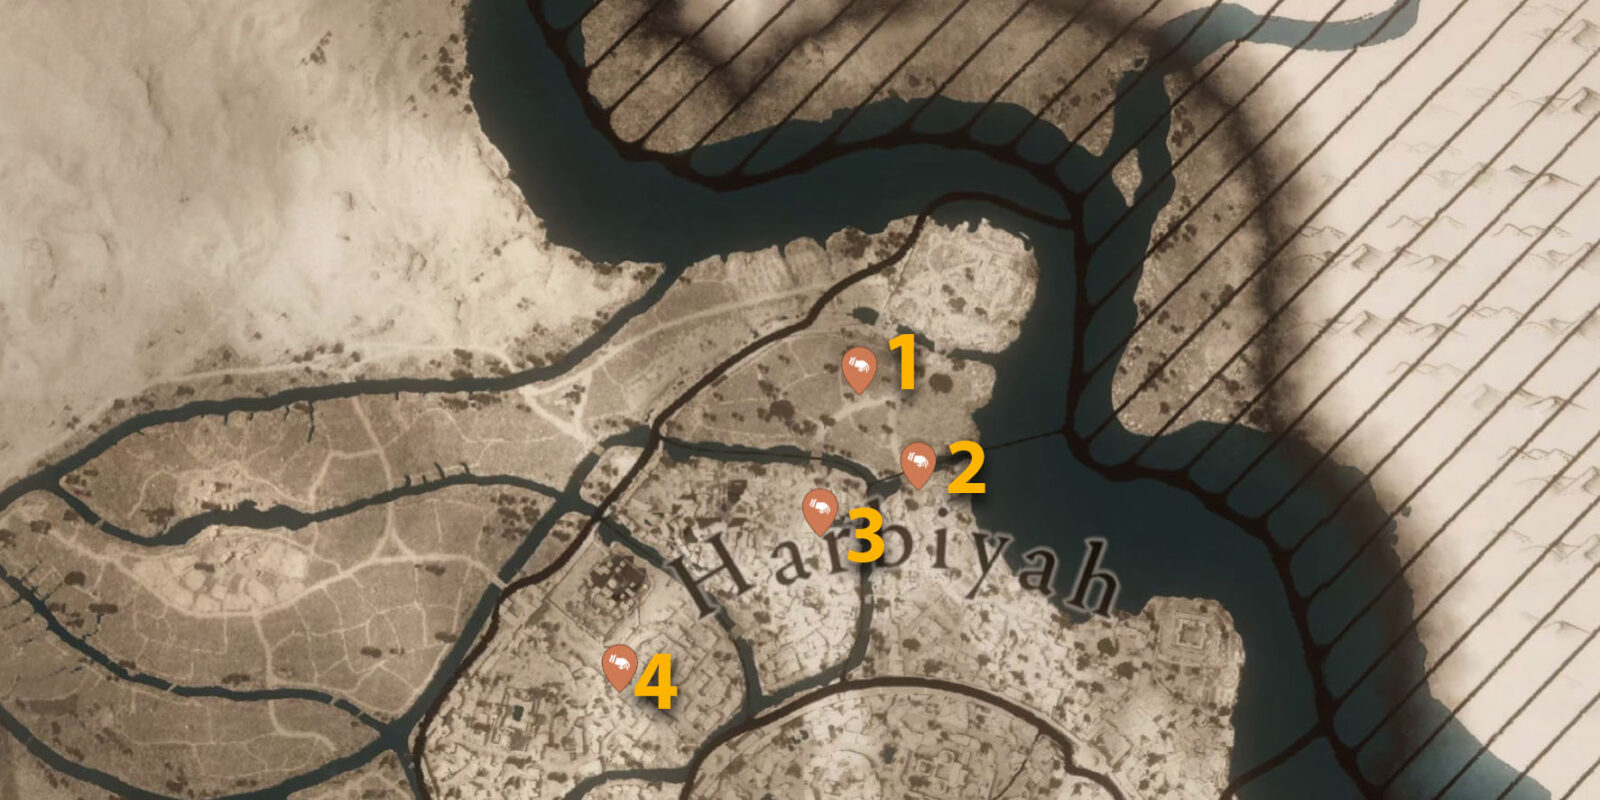 Harbiyah Dervis' Artifacts locations